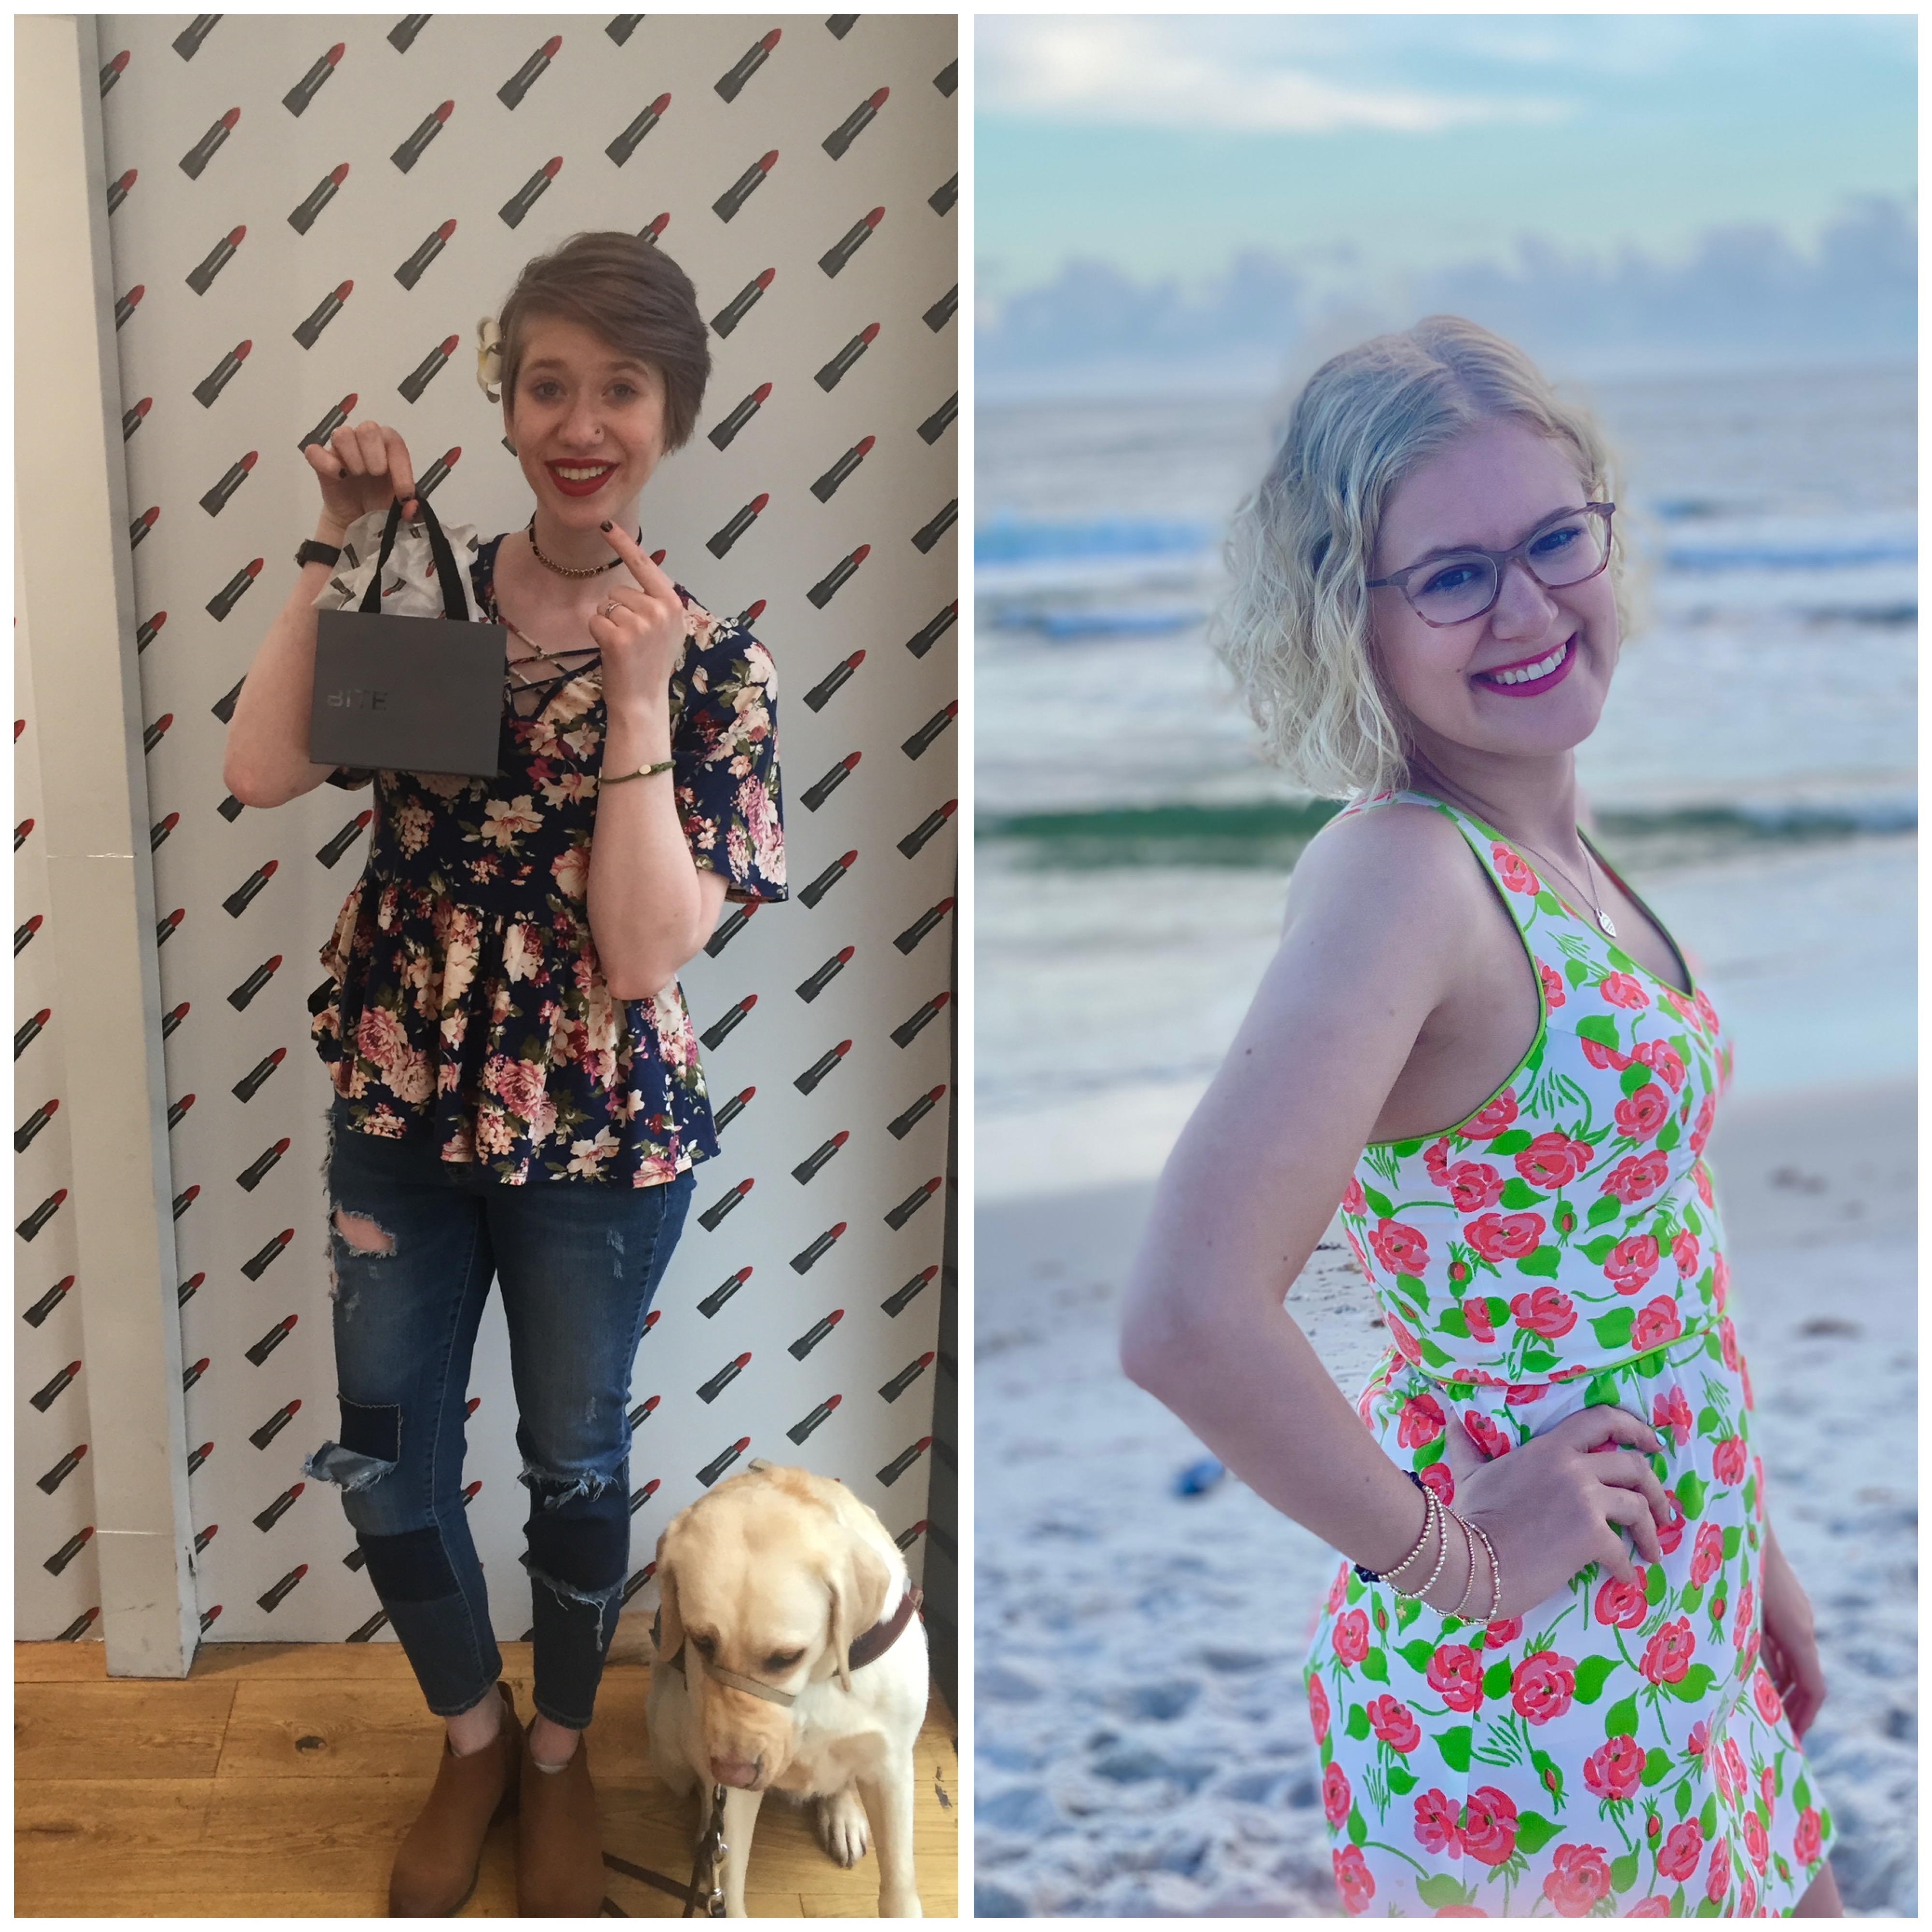 side by side collage of cassandra (left) jaw casey (right). cassandra stands in front of wall with lipstick wallpaper and smiles excitedly holding a black shopping bag and pointing at her red lips. casey wears a colorful dress with strawberries and smiles over her shoulder as she stands on a shore